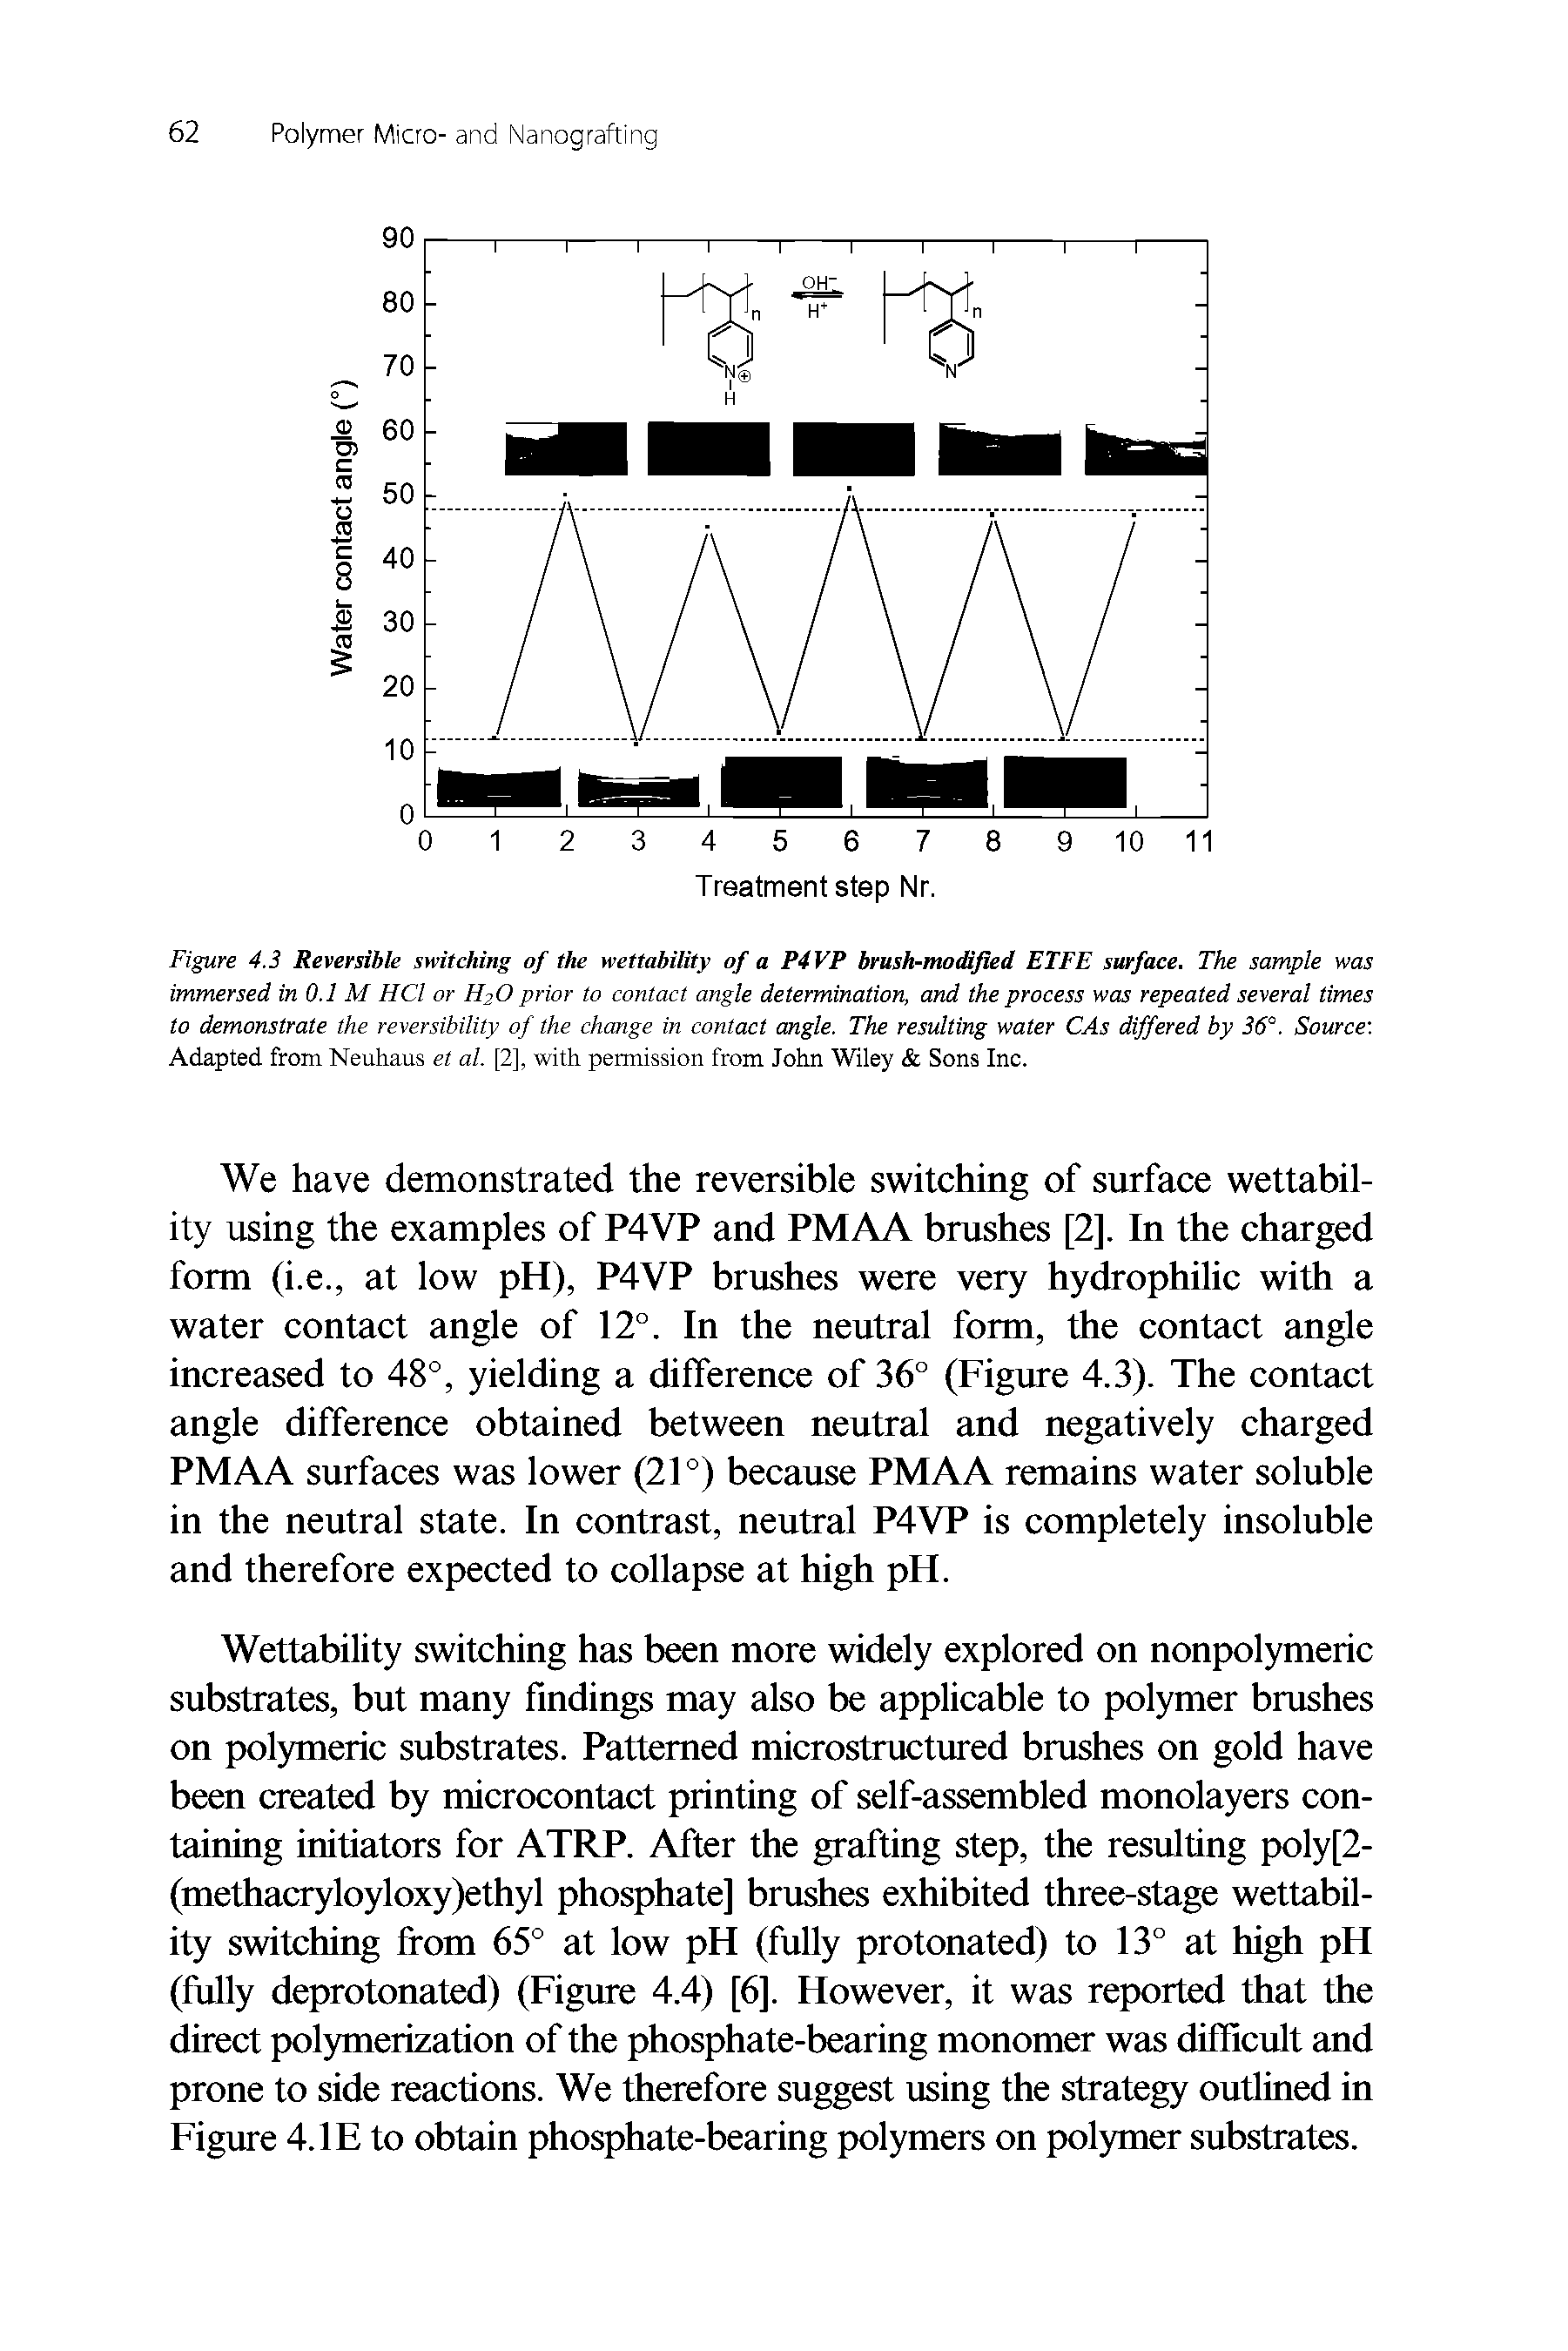 Figure 4.3 Reversible switching of the wettability of a P4VP brush-modified ETFE surface. The sample was immersed in 0.1 M HCl or H2O prior to contact angle determination, and the process was repeated several times to demonstrate the reversibility of the change in contact angle. The resulting water CAs differed by 36. Source Adapted from Neuhaus et al. [2], with permission from John Wiley Sons Inc.